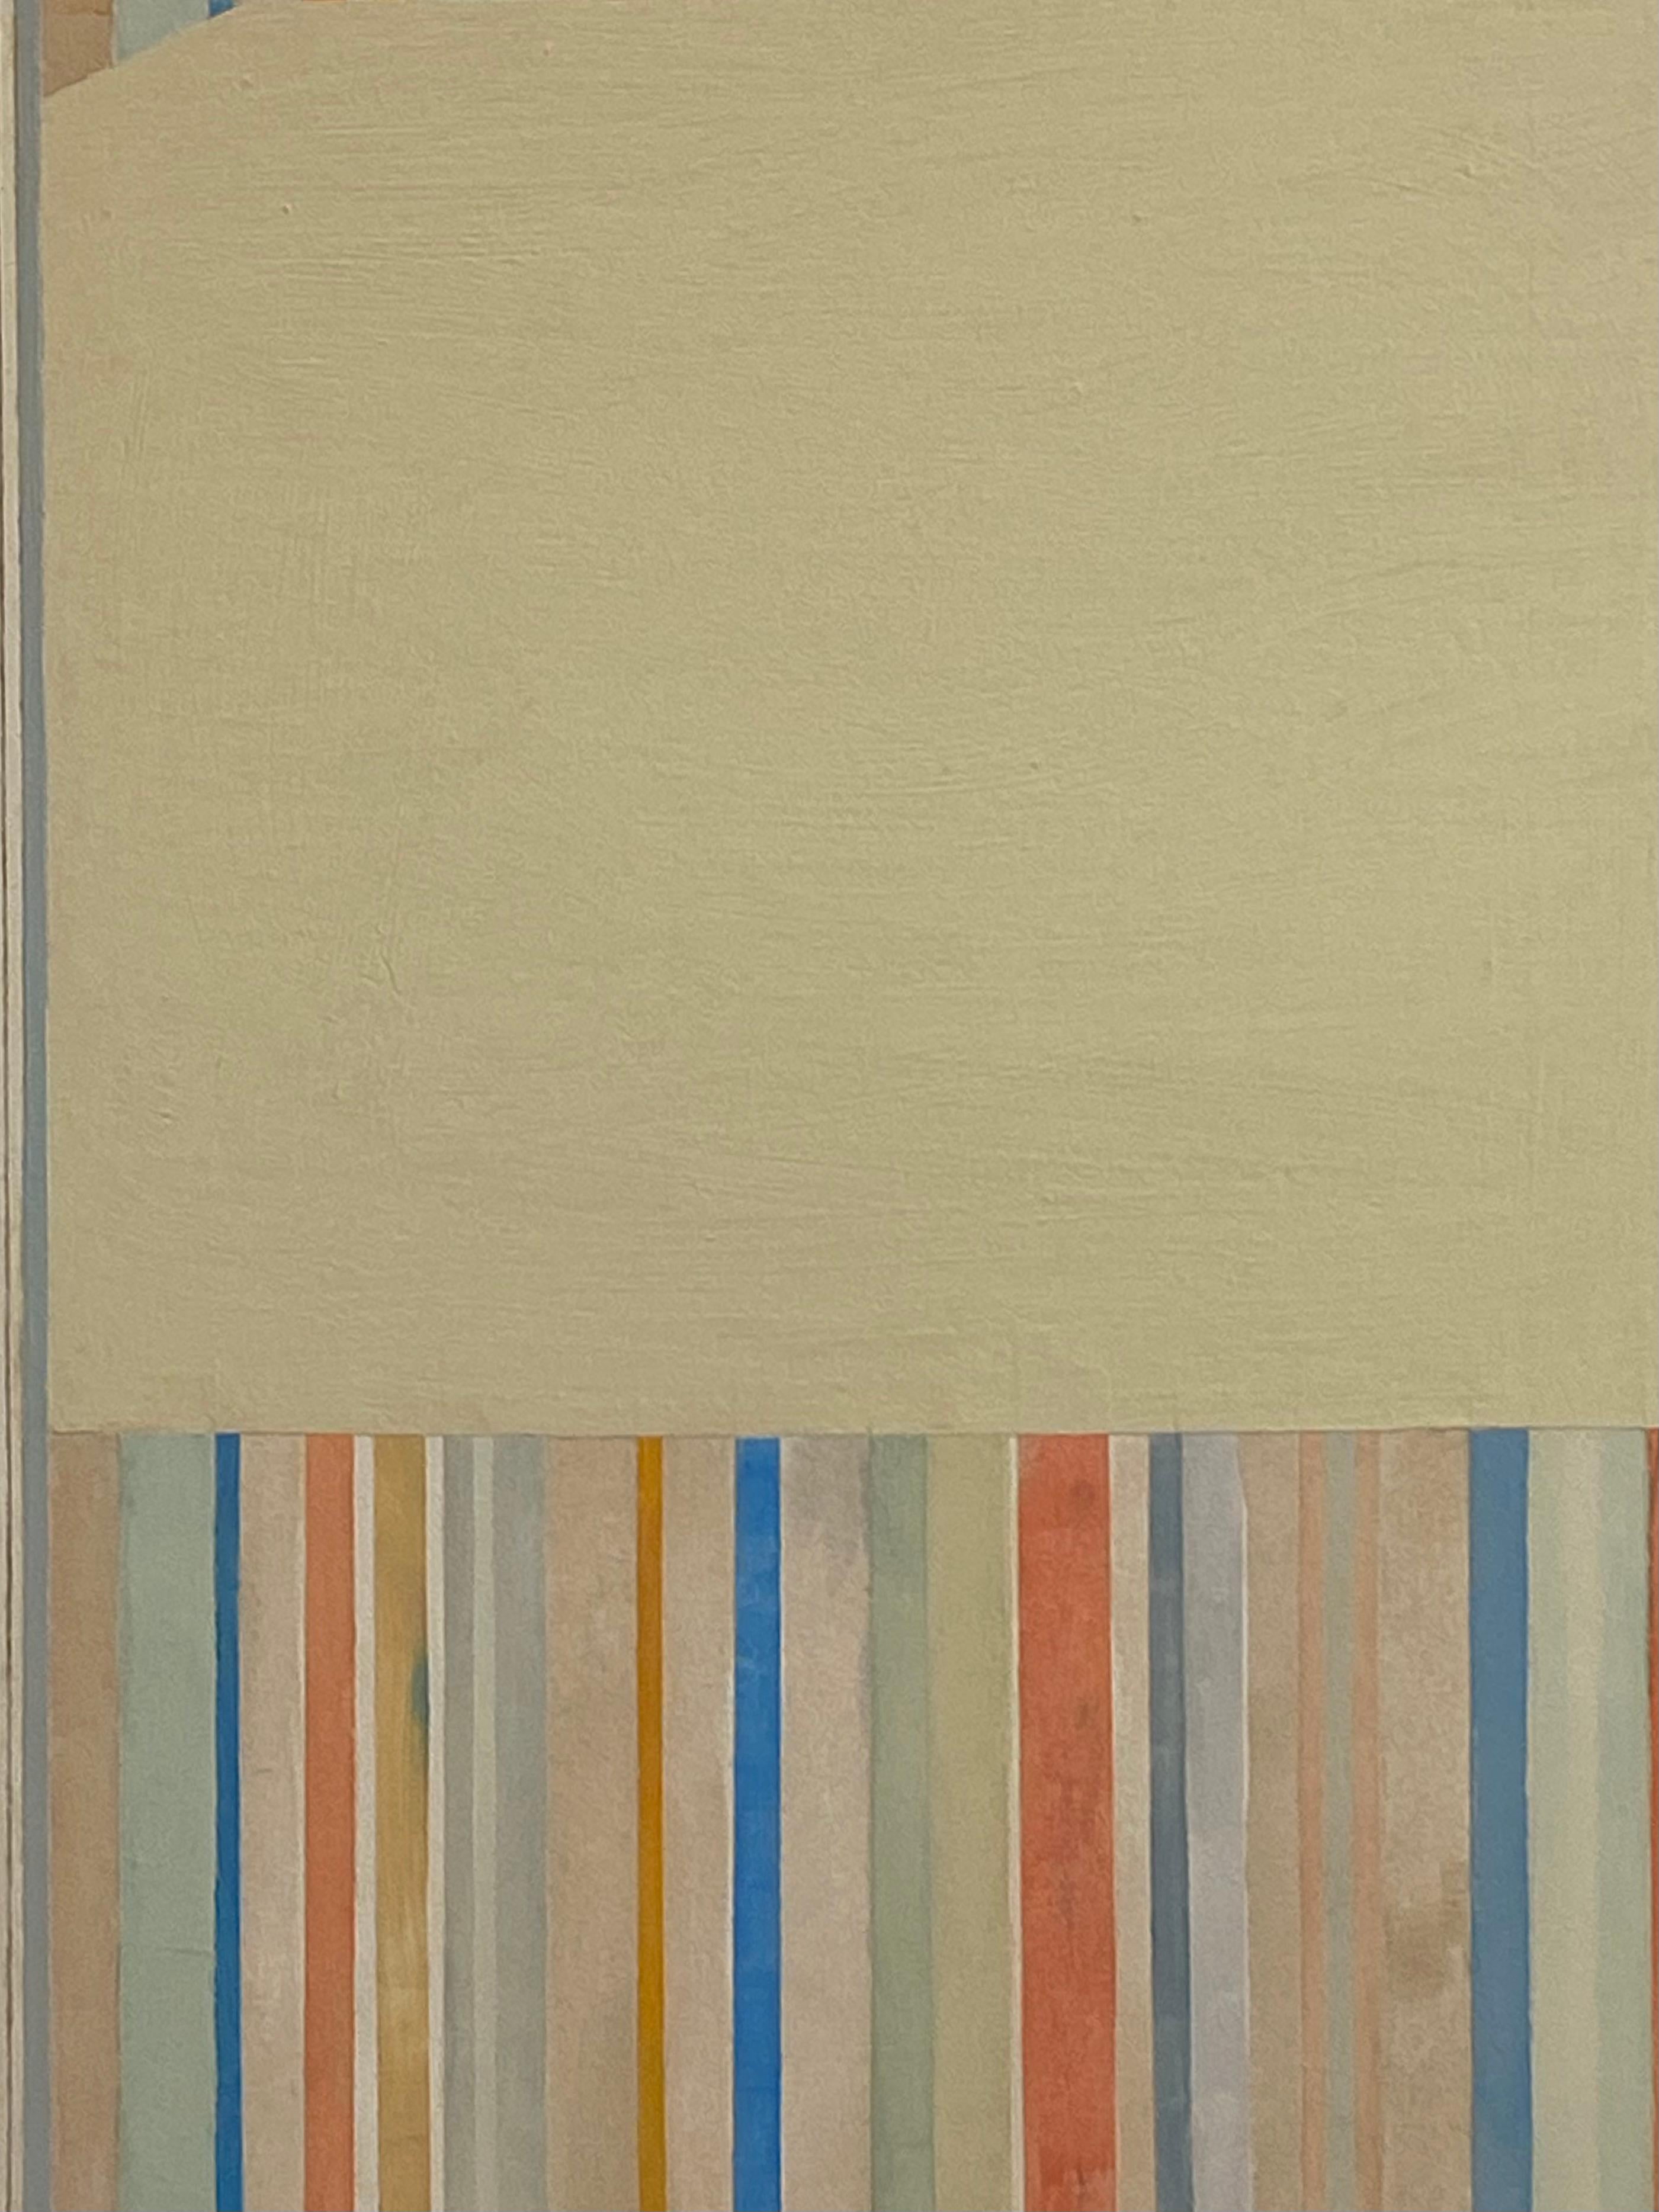 Clean and precise, carefully ordered stripes and blocks of color in orange, gray blue, pale yellow, blue and brown are lively and vibrant against the soft beige background. Signed, dated and titled on verso.

Elizabeth Gourlay’s work is a meditation